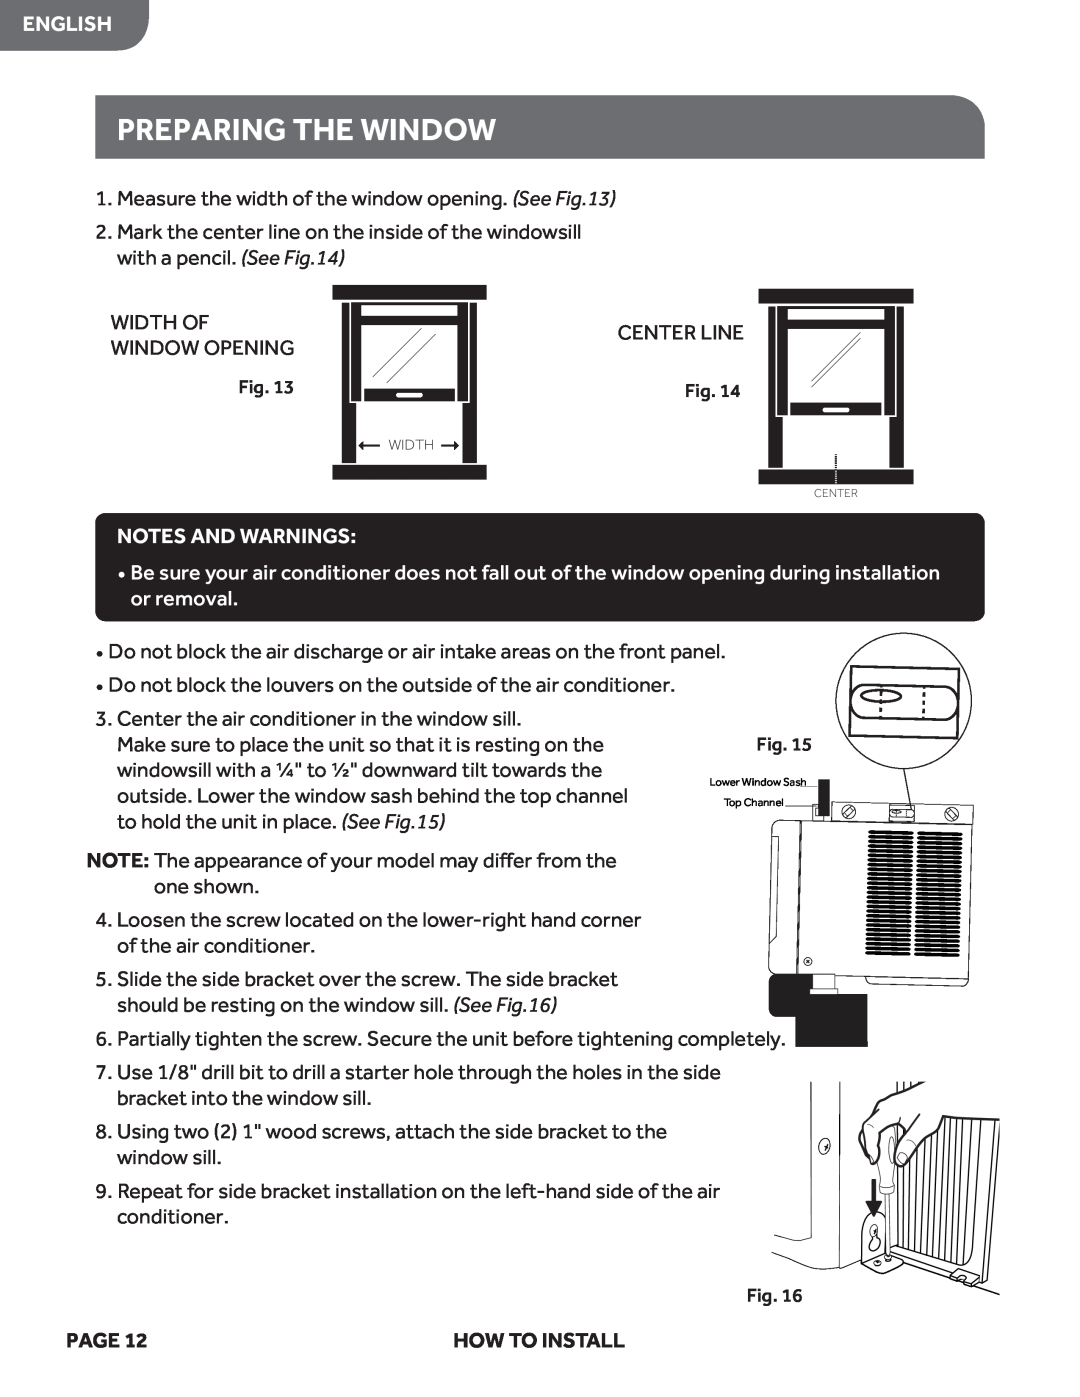 Haier HWF05XCL manual Preparing The Window, English, Notes And Warnings, Page 